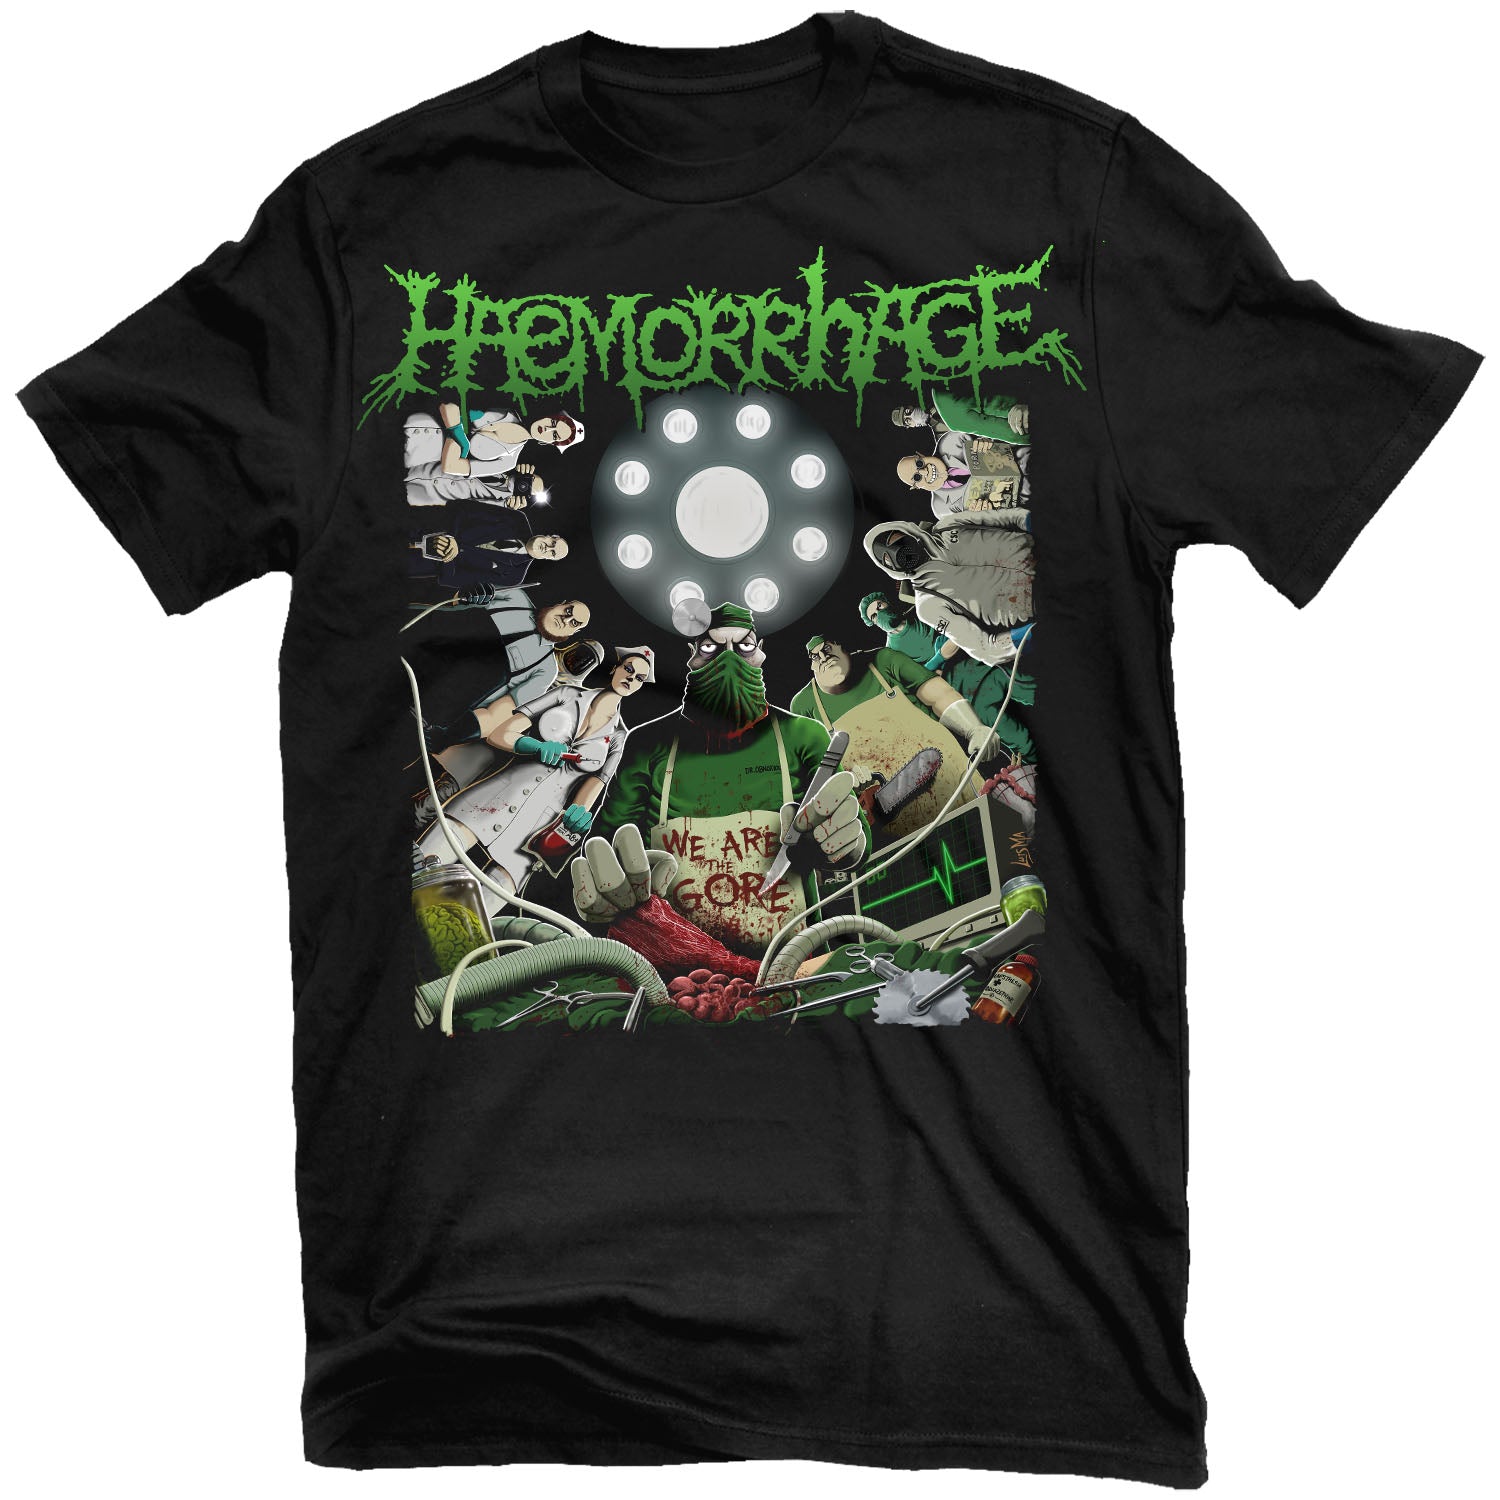 Haemorrhage "We Are The Gore" T-Shirt